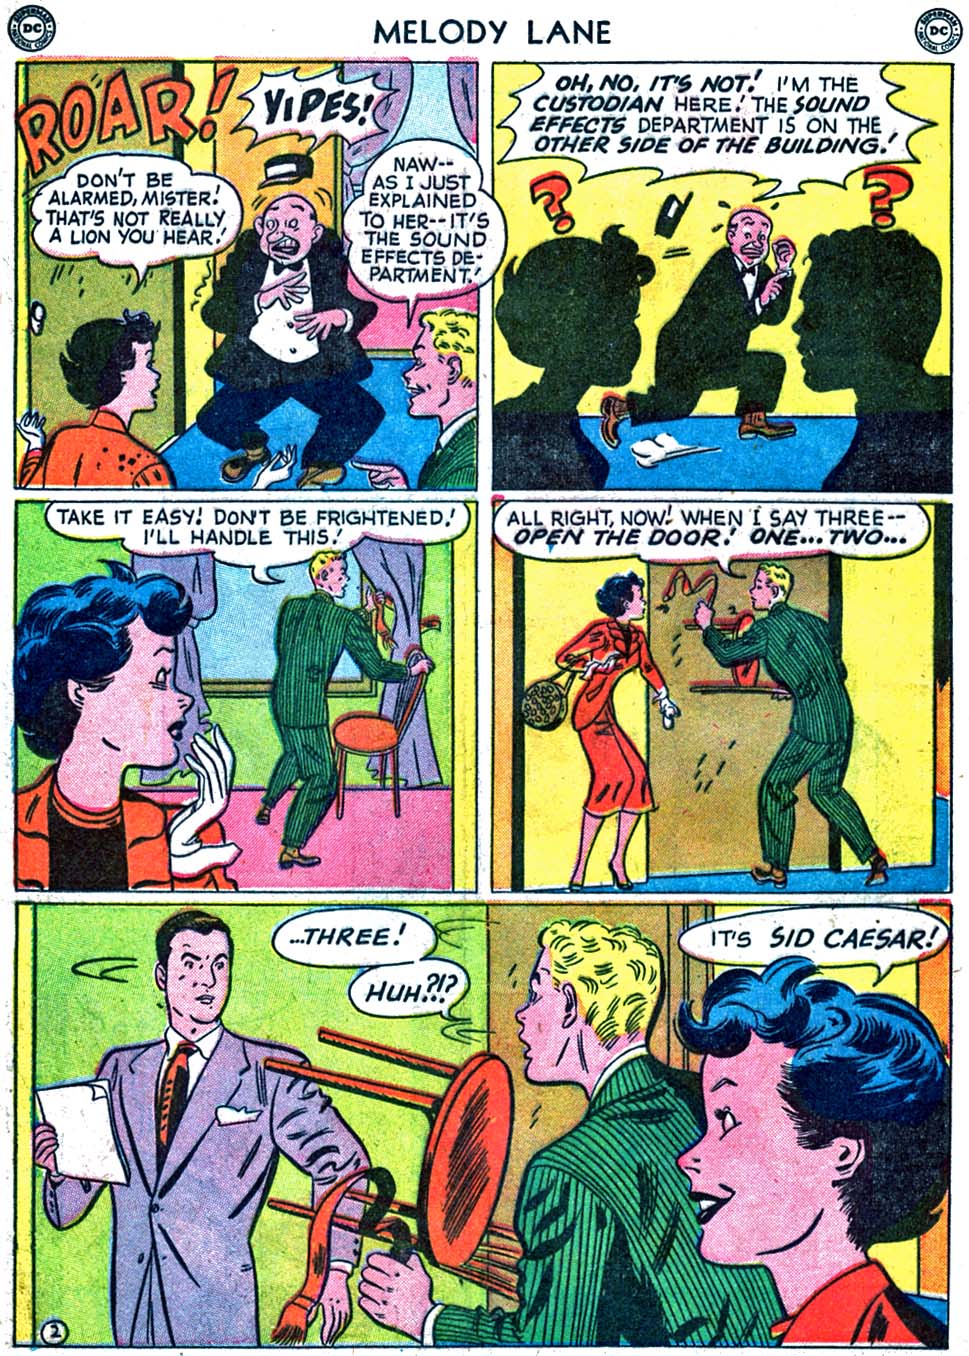 Read online Miss Melody Lane of Broadway comic -  Issue #2 - 16